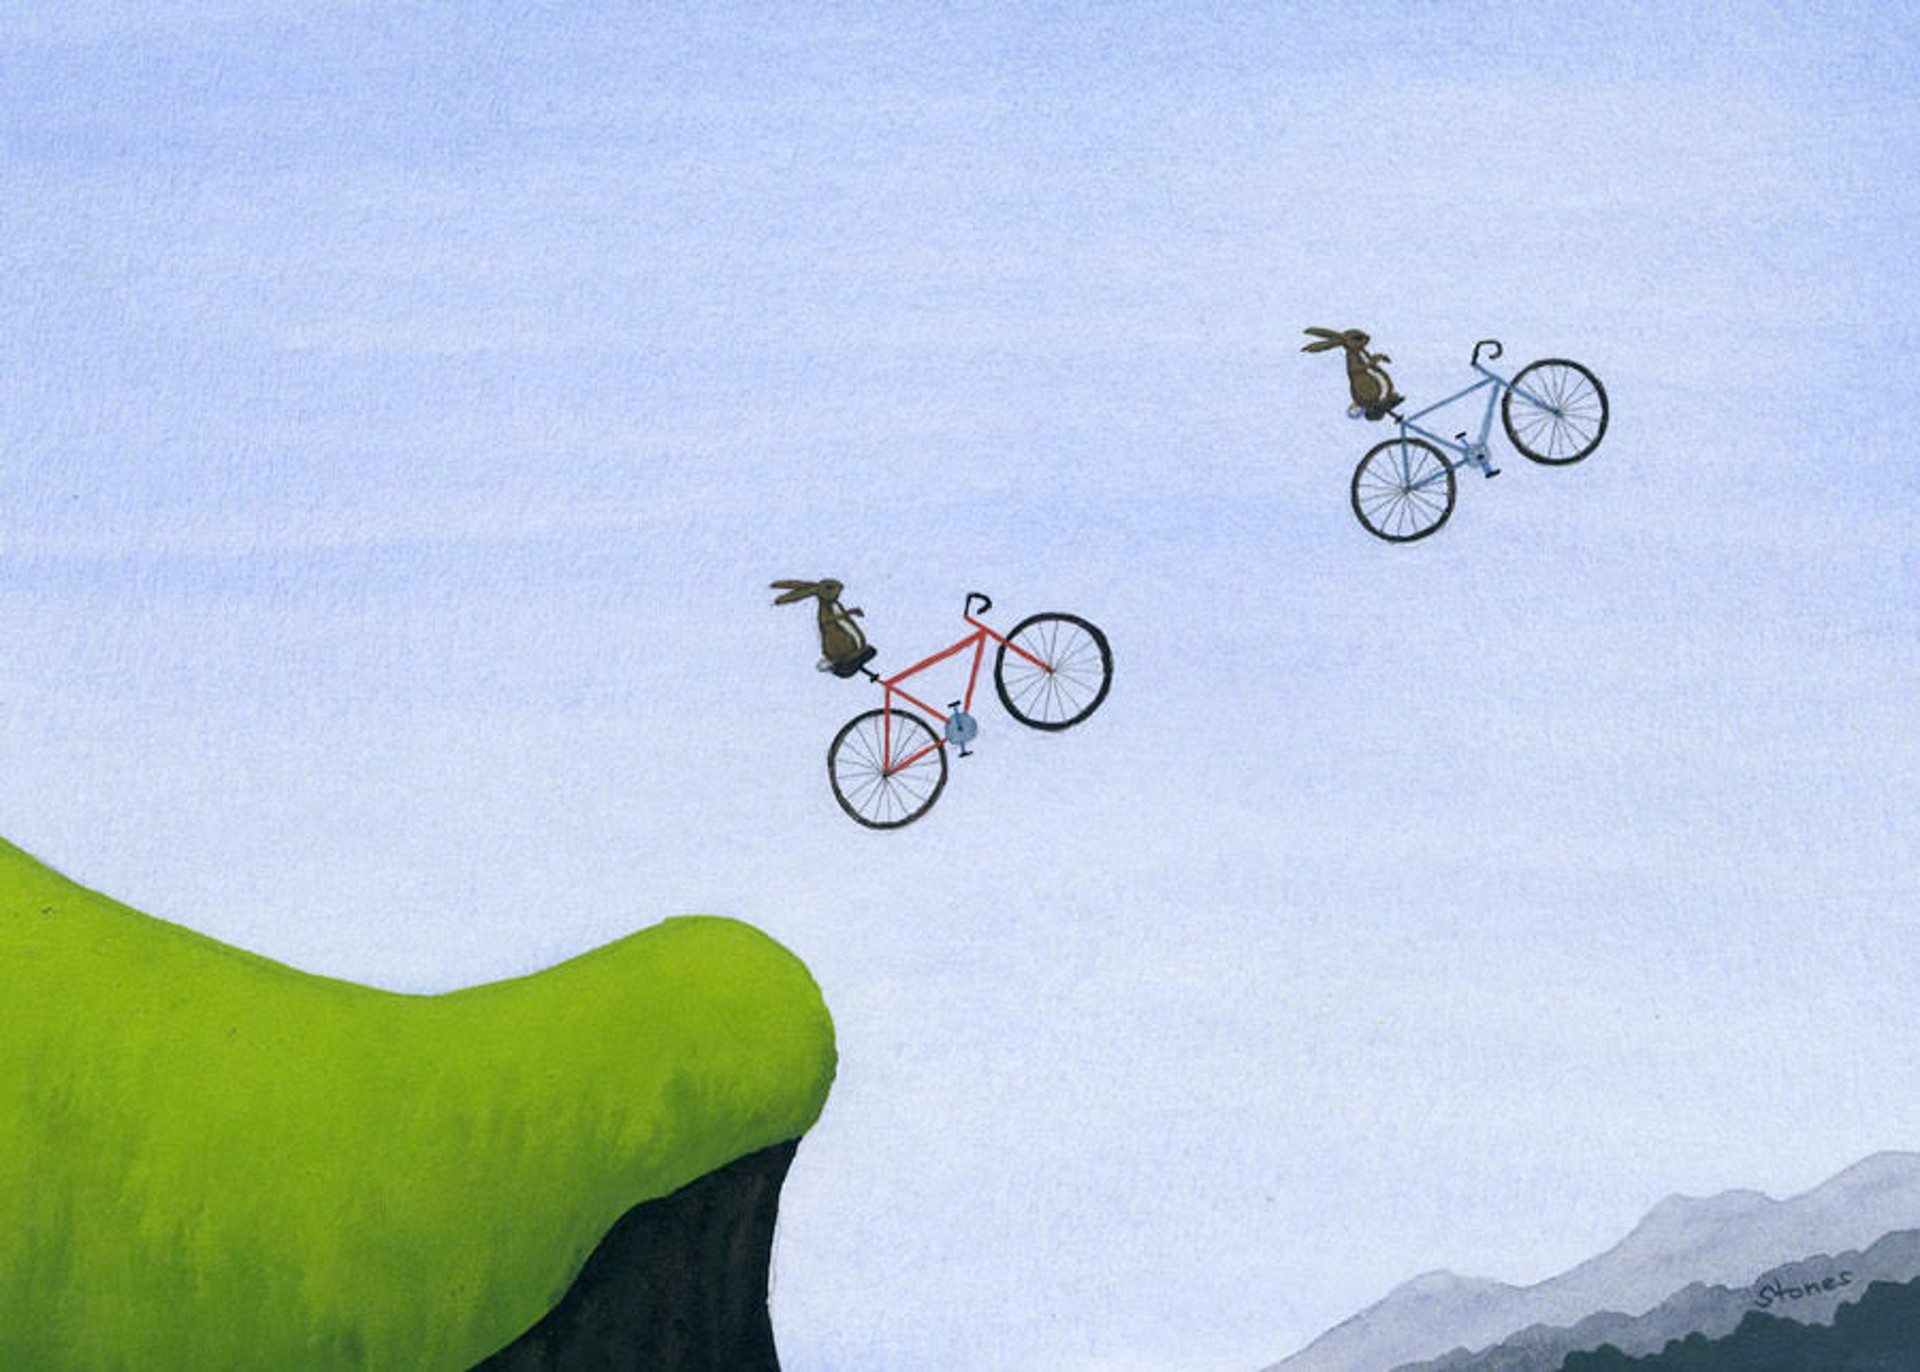 Rabbits With Bicycles by Greg Stones